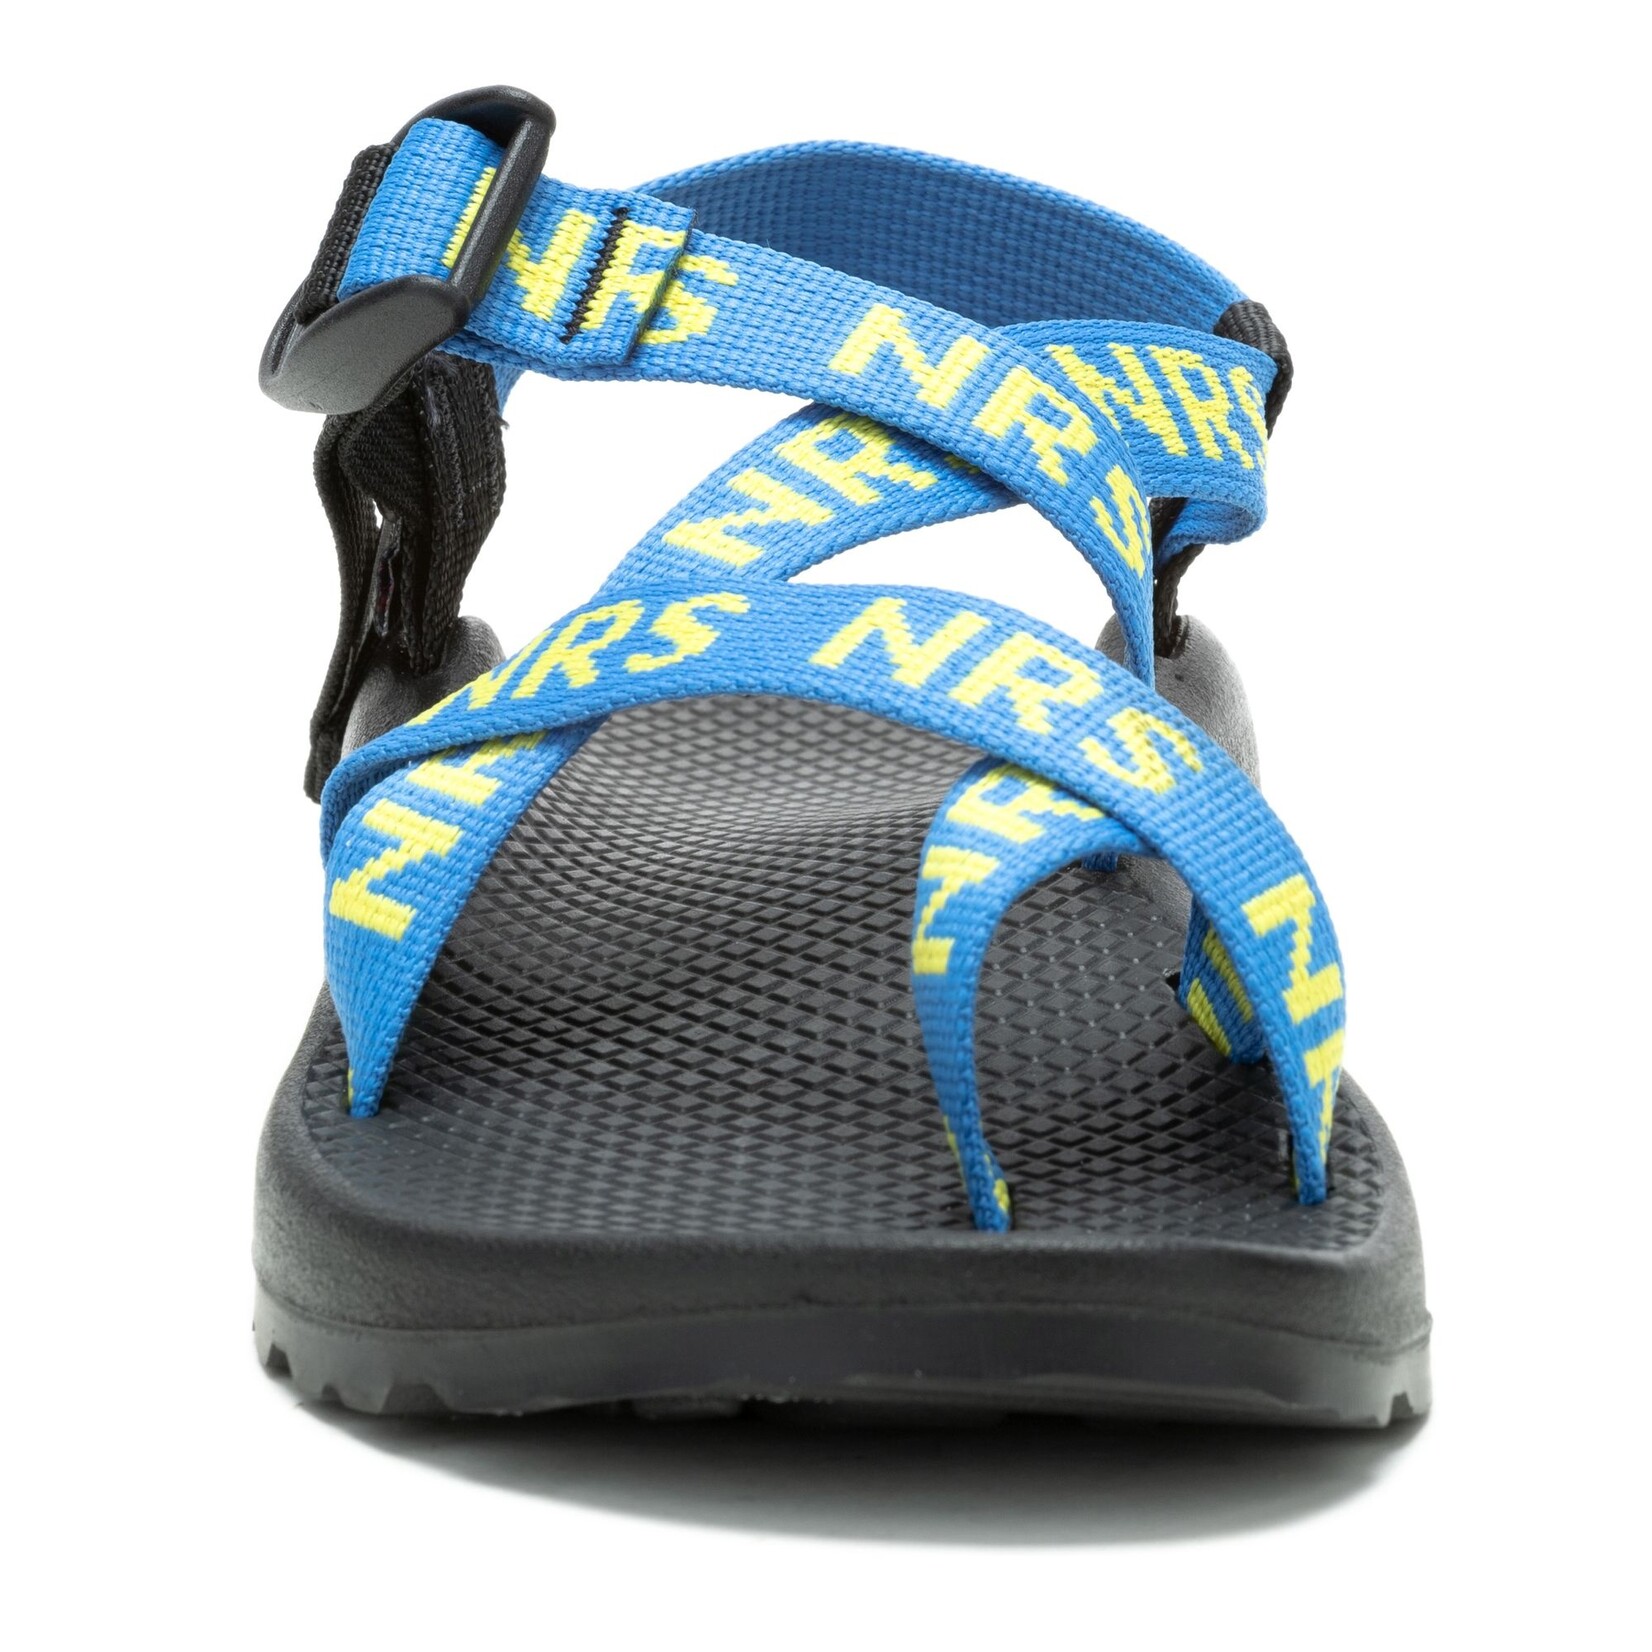 Chaco Women's Z/2 Classic Sandals - Utah Whitewater Gear